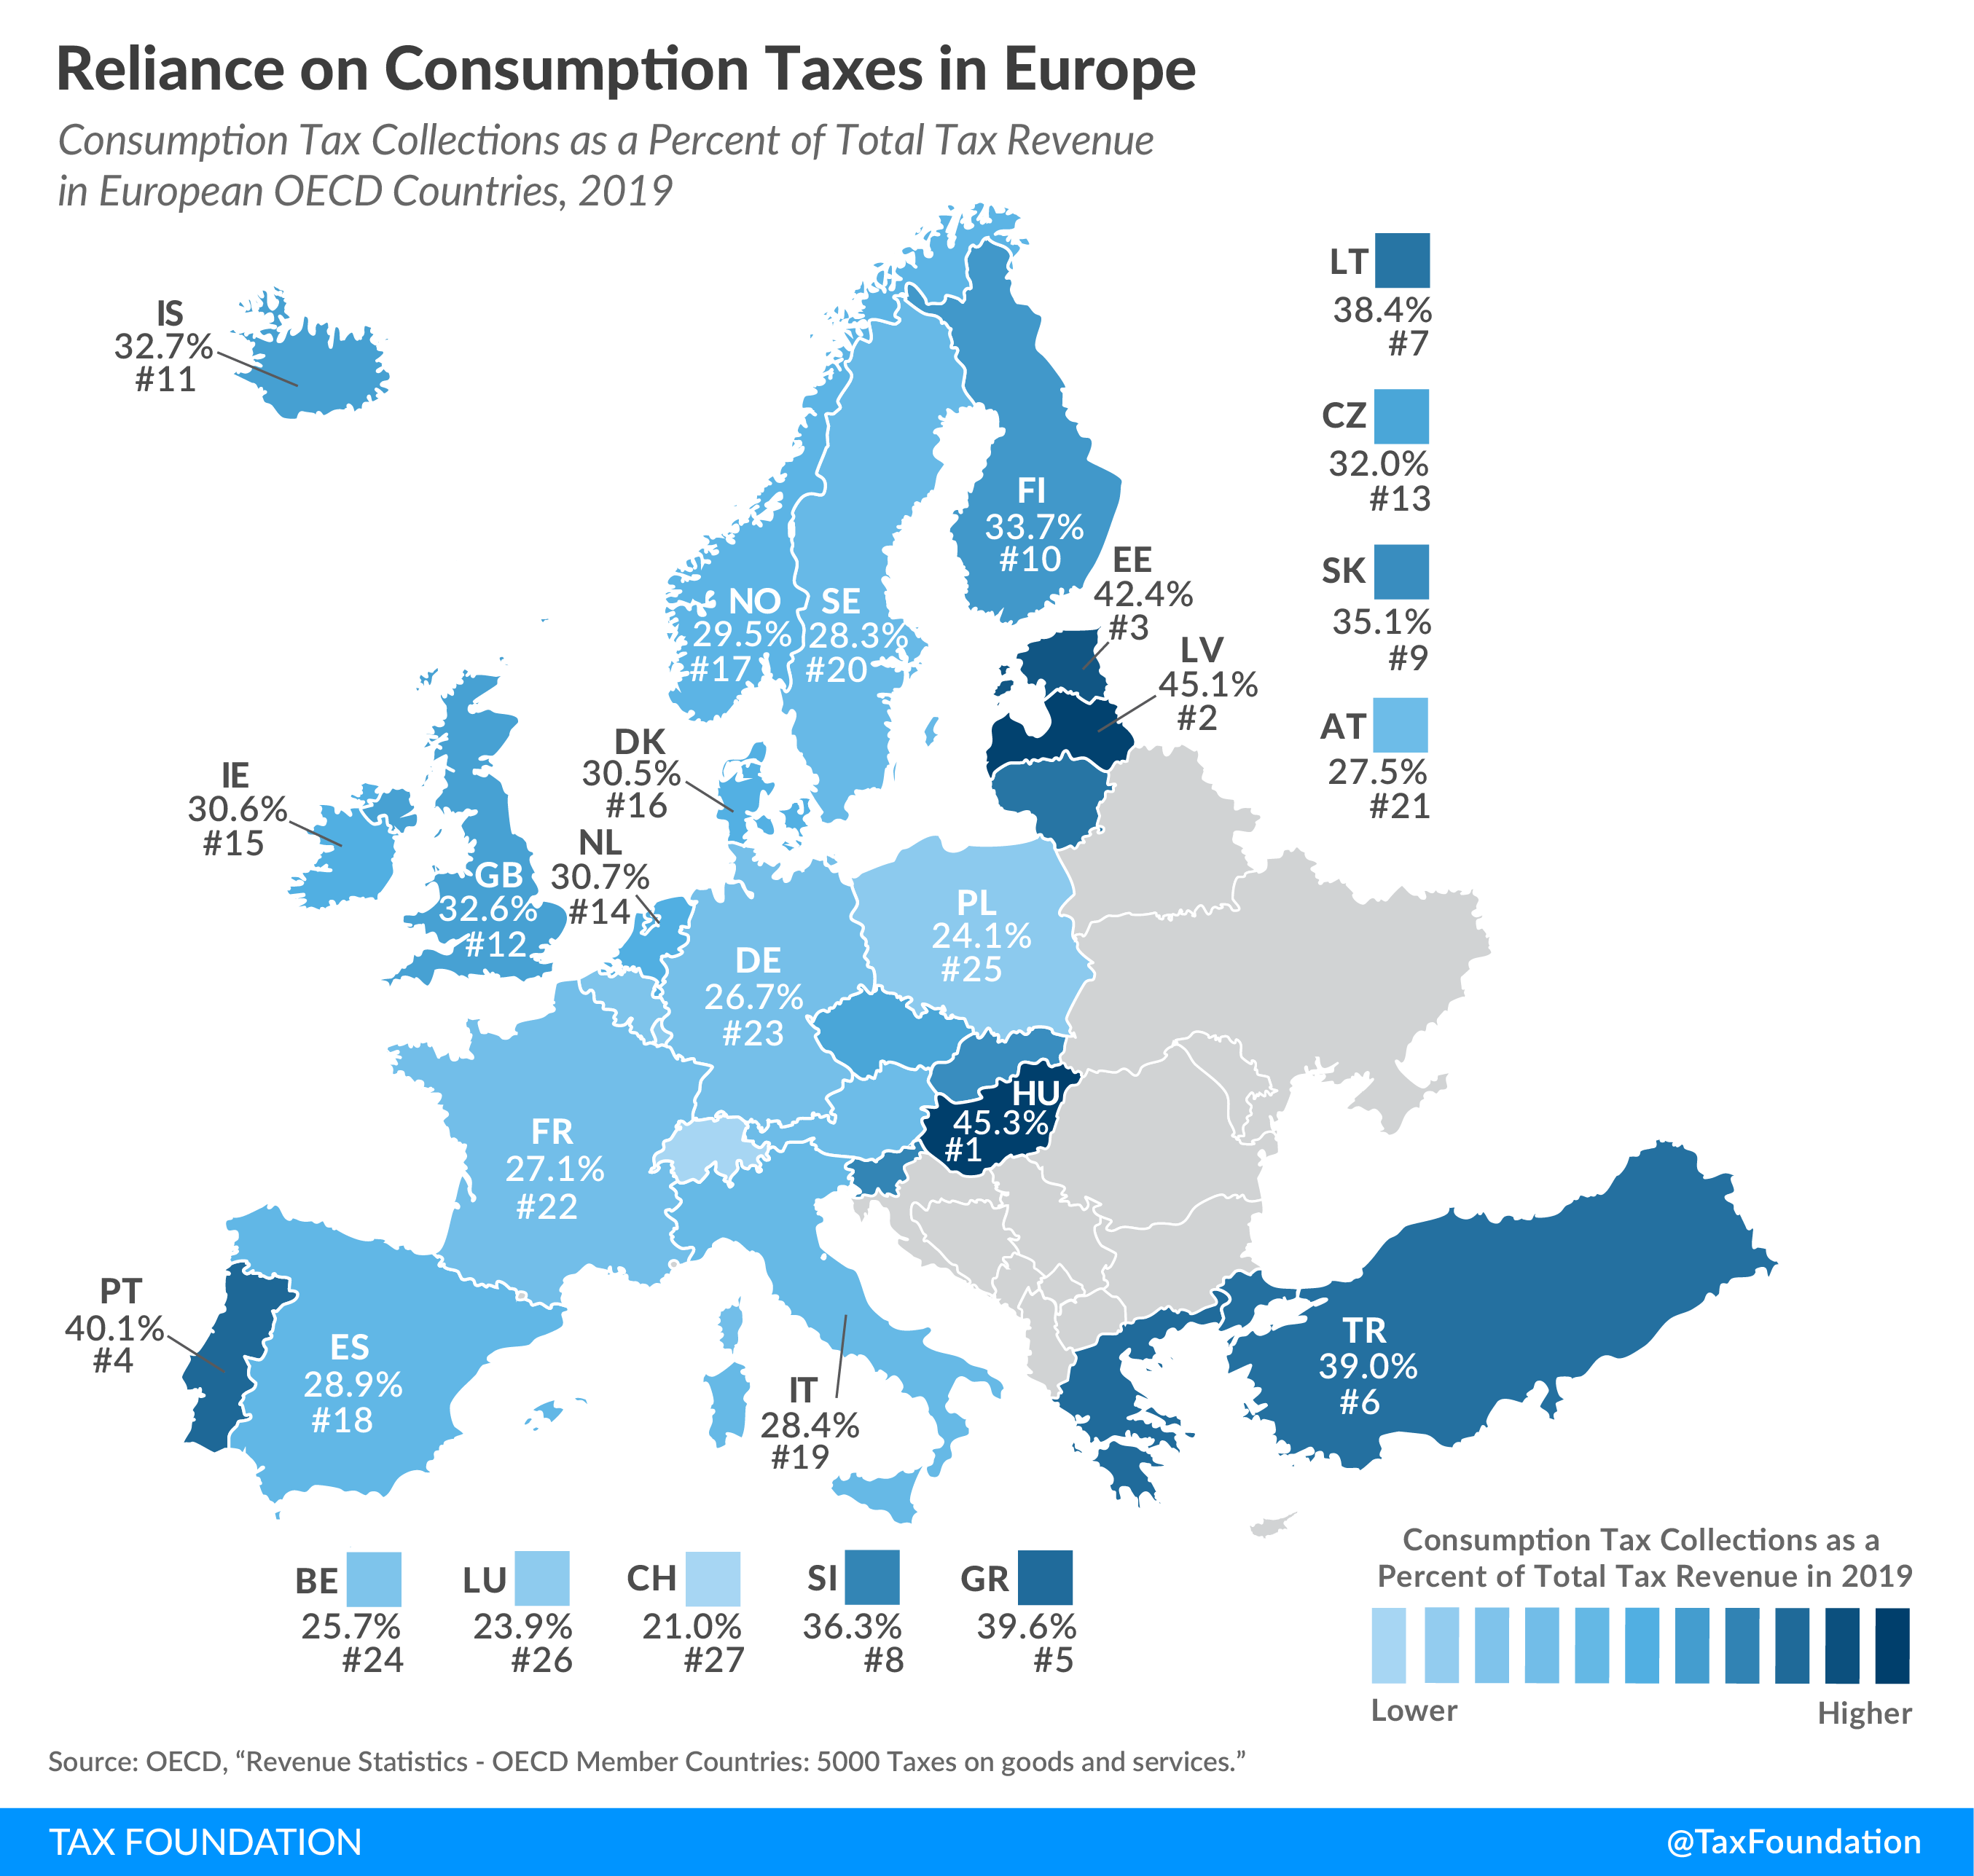 Consumption taxes in Europe, reliance on consumption taxes in Europe, reliance on consumption tax revenue in Europe, taxes on goods and services in Europe